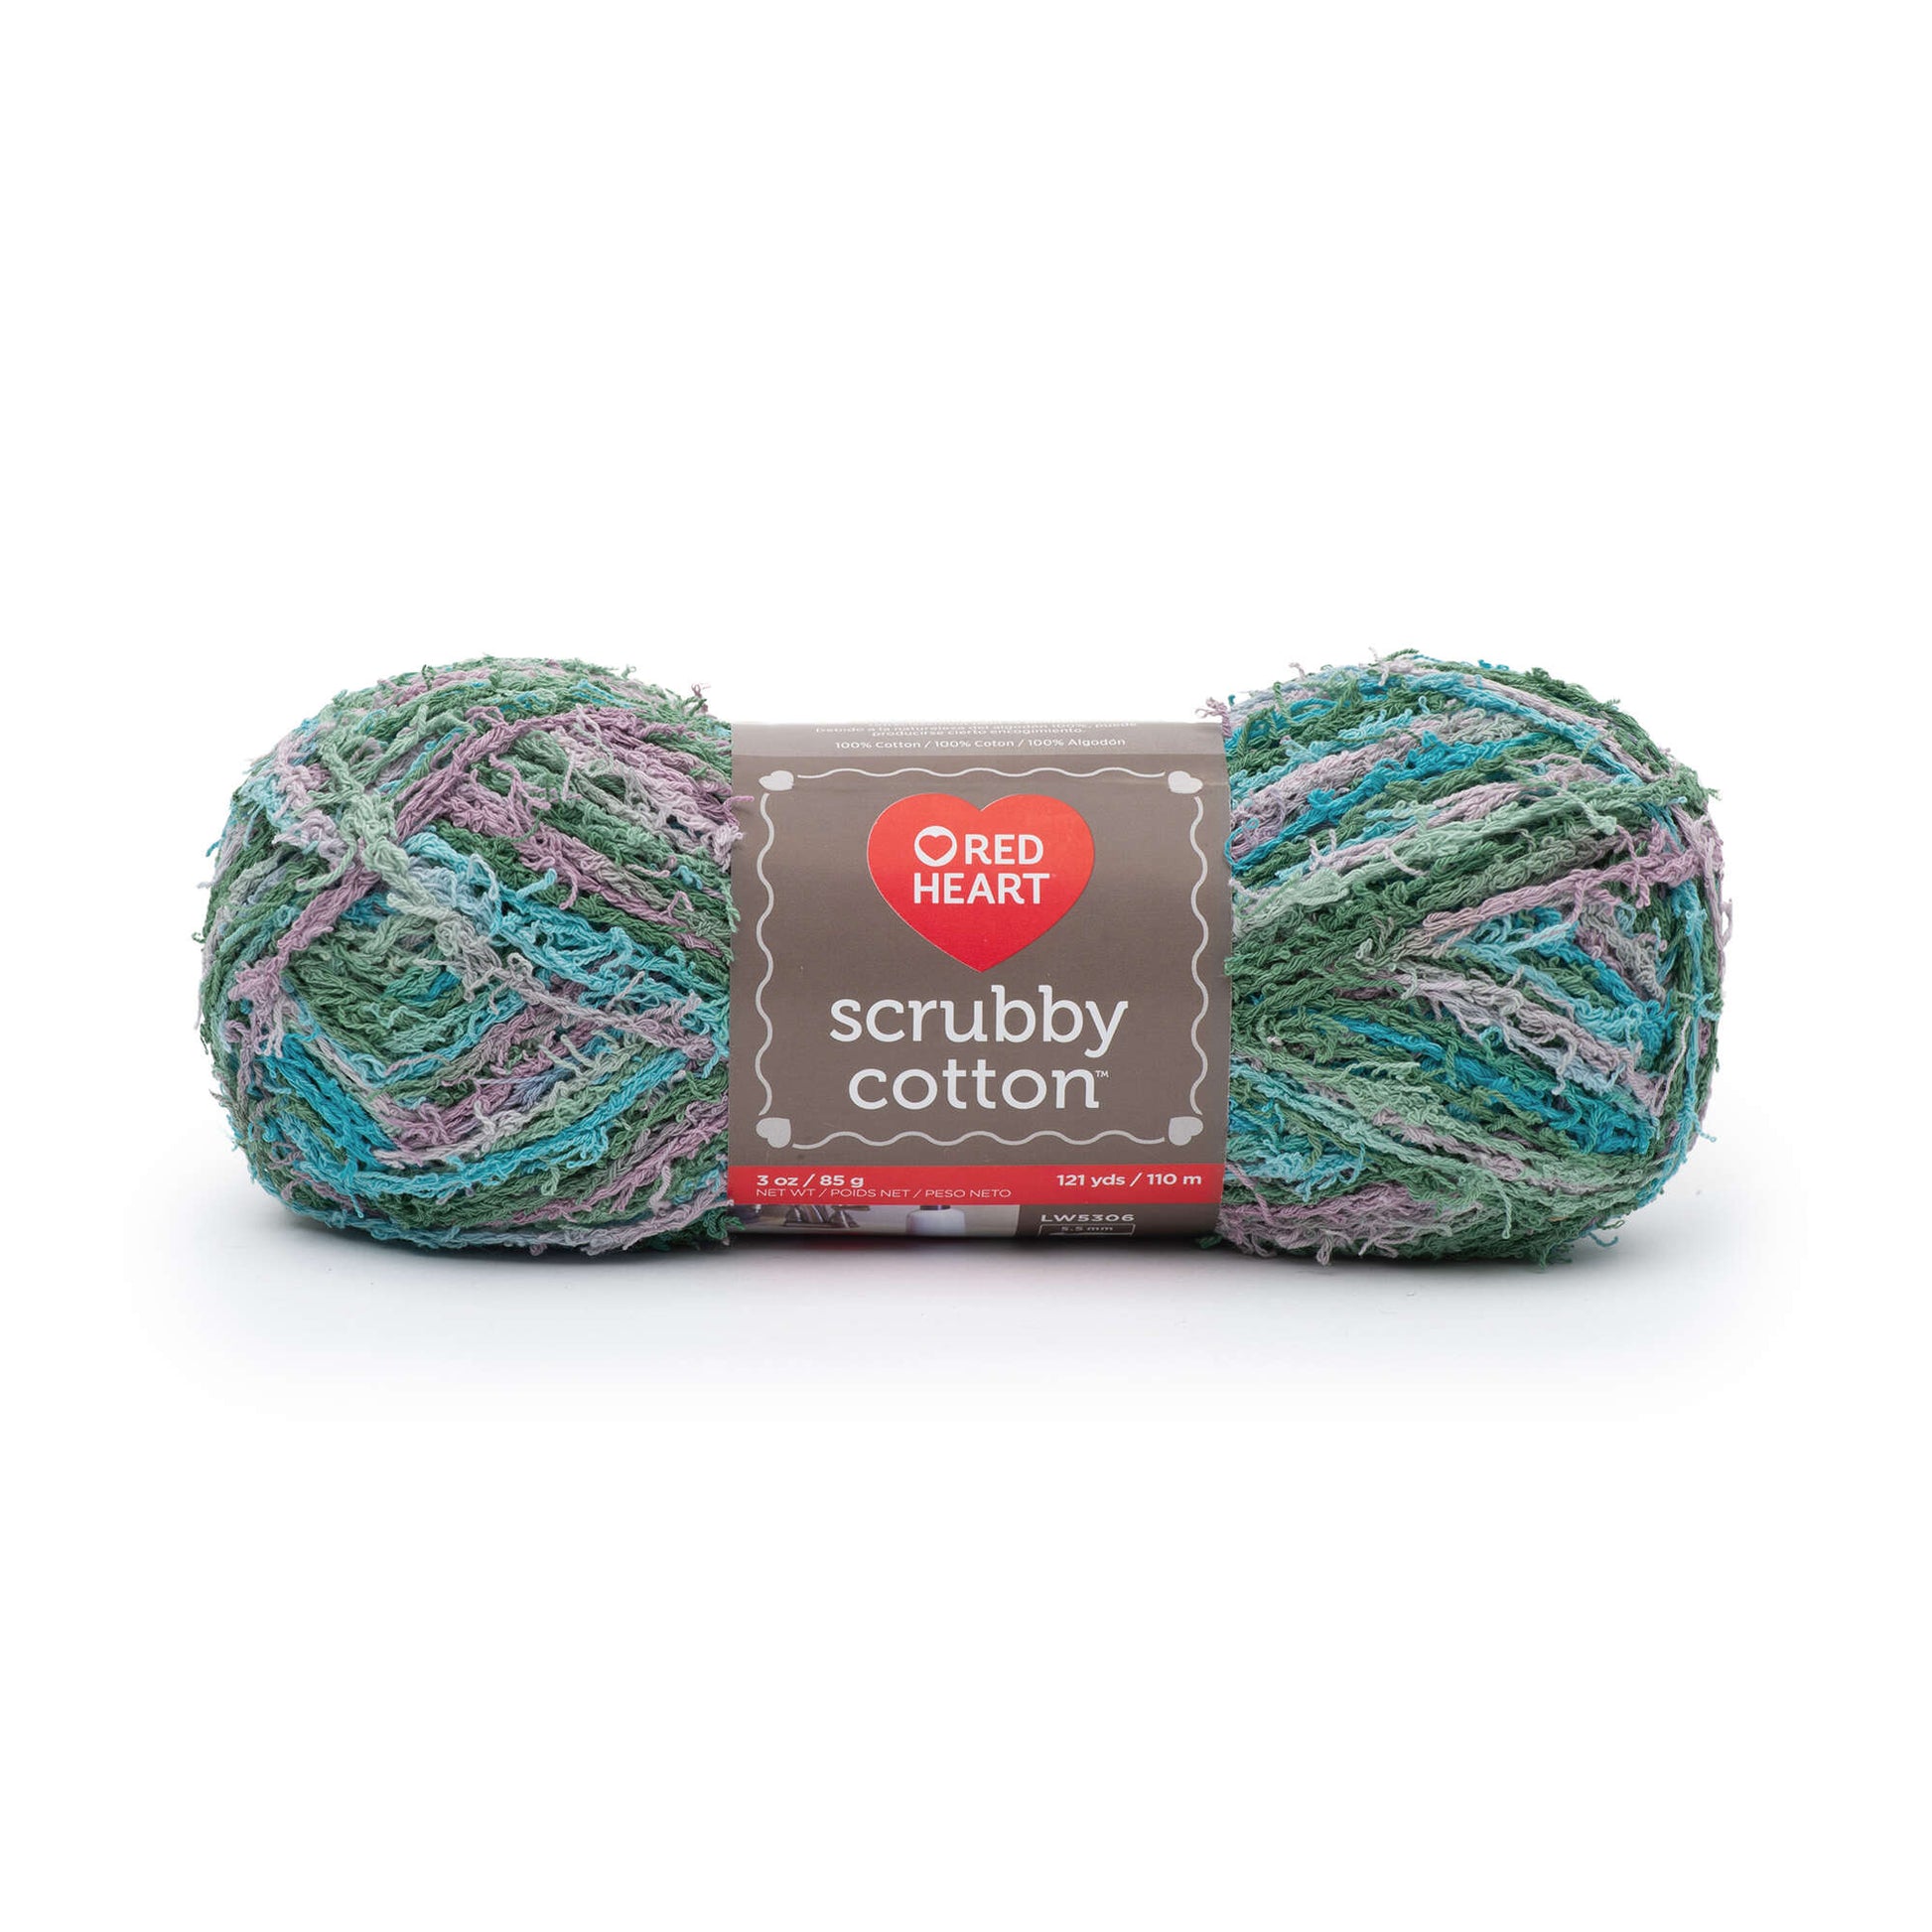 Red Heart Scrubby Cotton Yarn - Discontinued shades Paradise Print